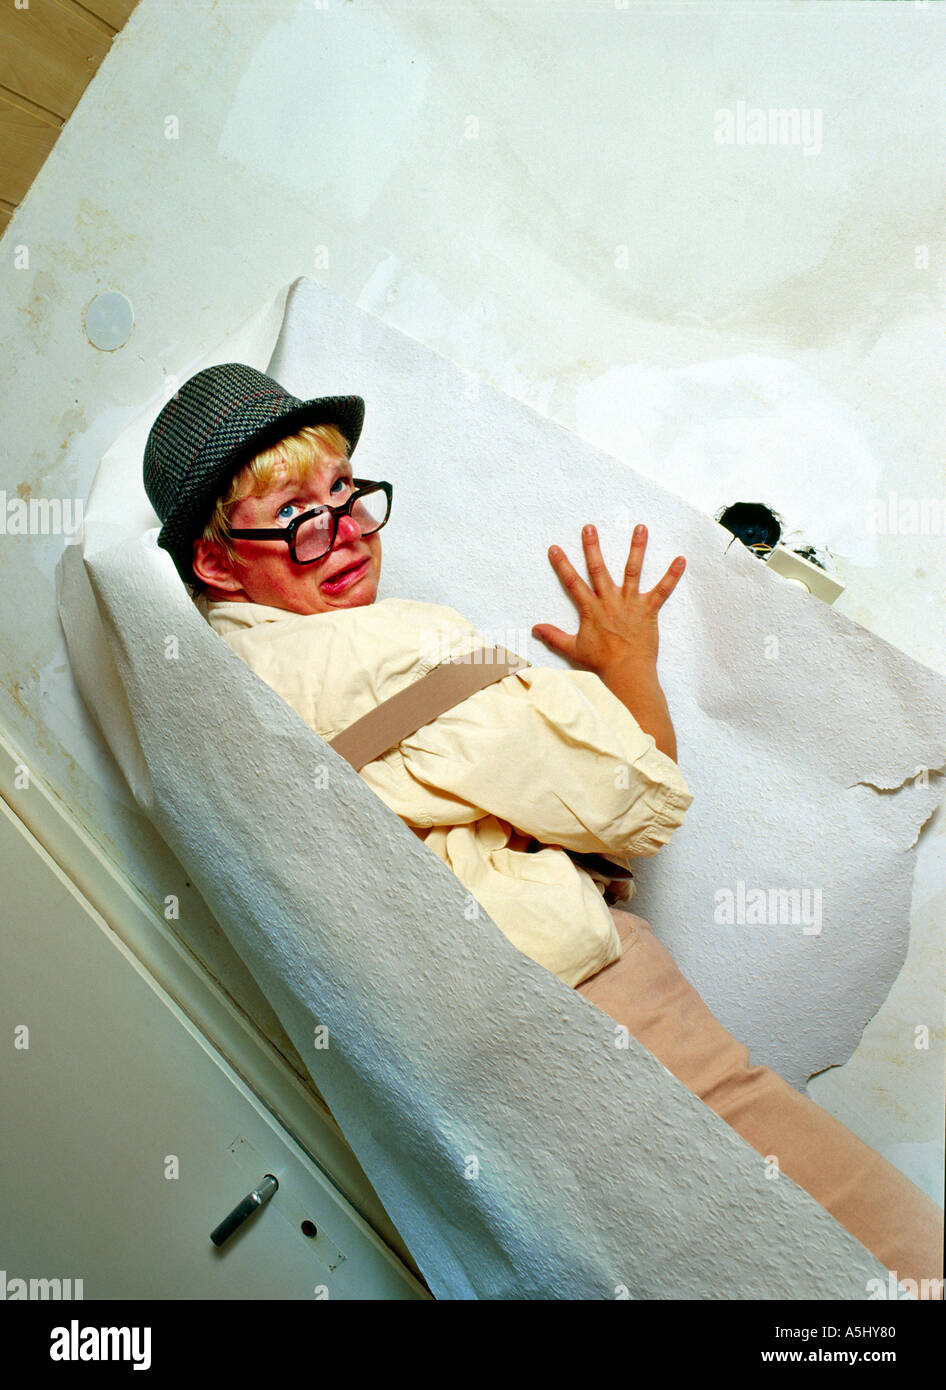 MR PR silly handyman do it yourselfer renovating a flat papering the walls Stock Photo